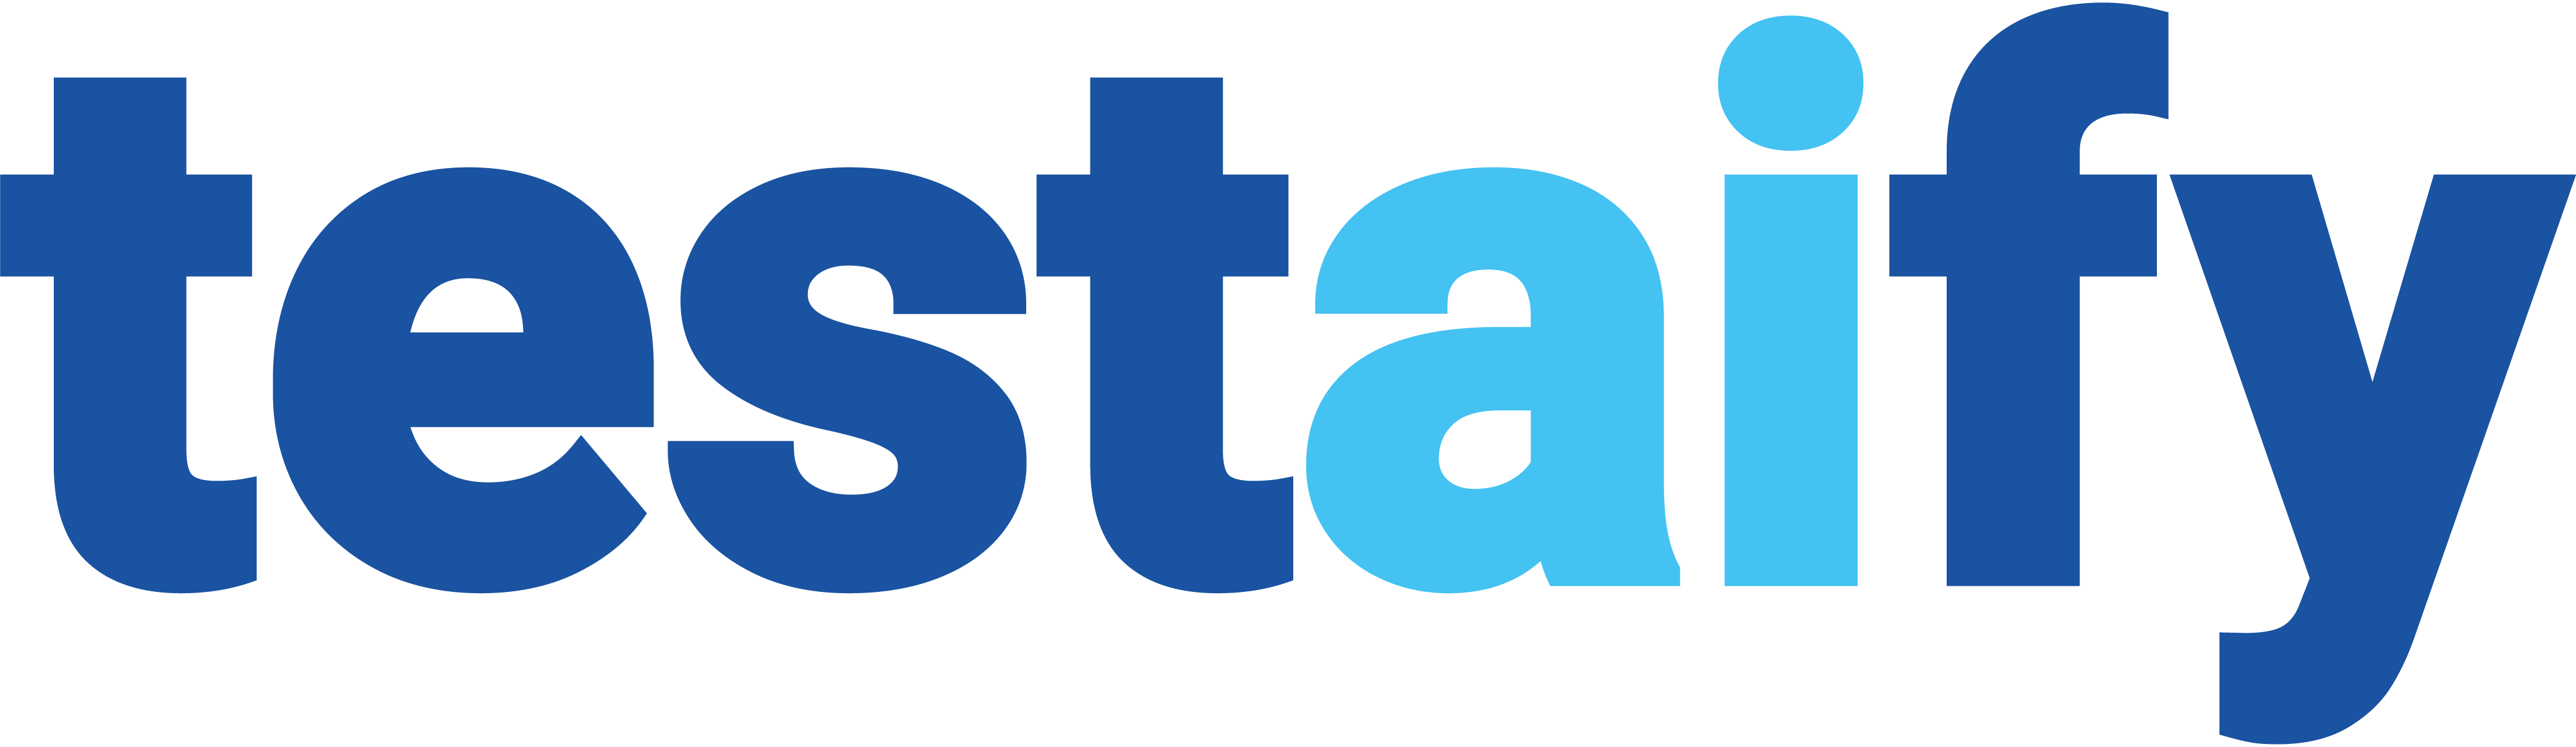 Testaify's AI-first testing platform will change software testing forever to make quality a metric and not a goal.